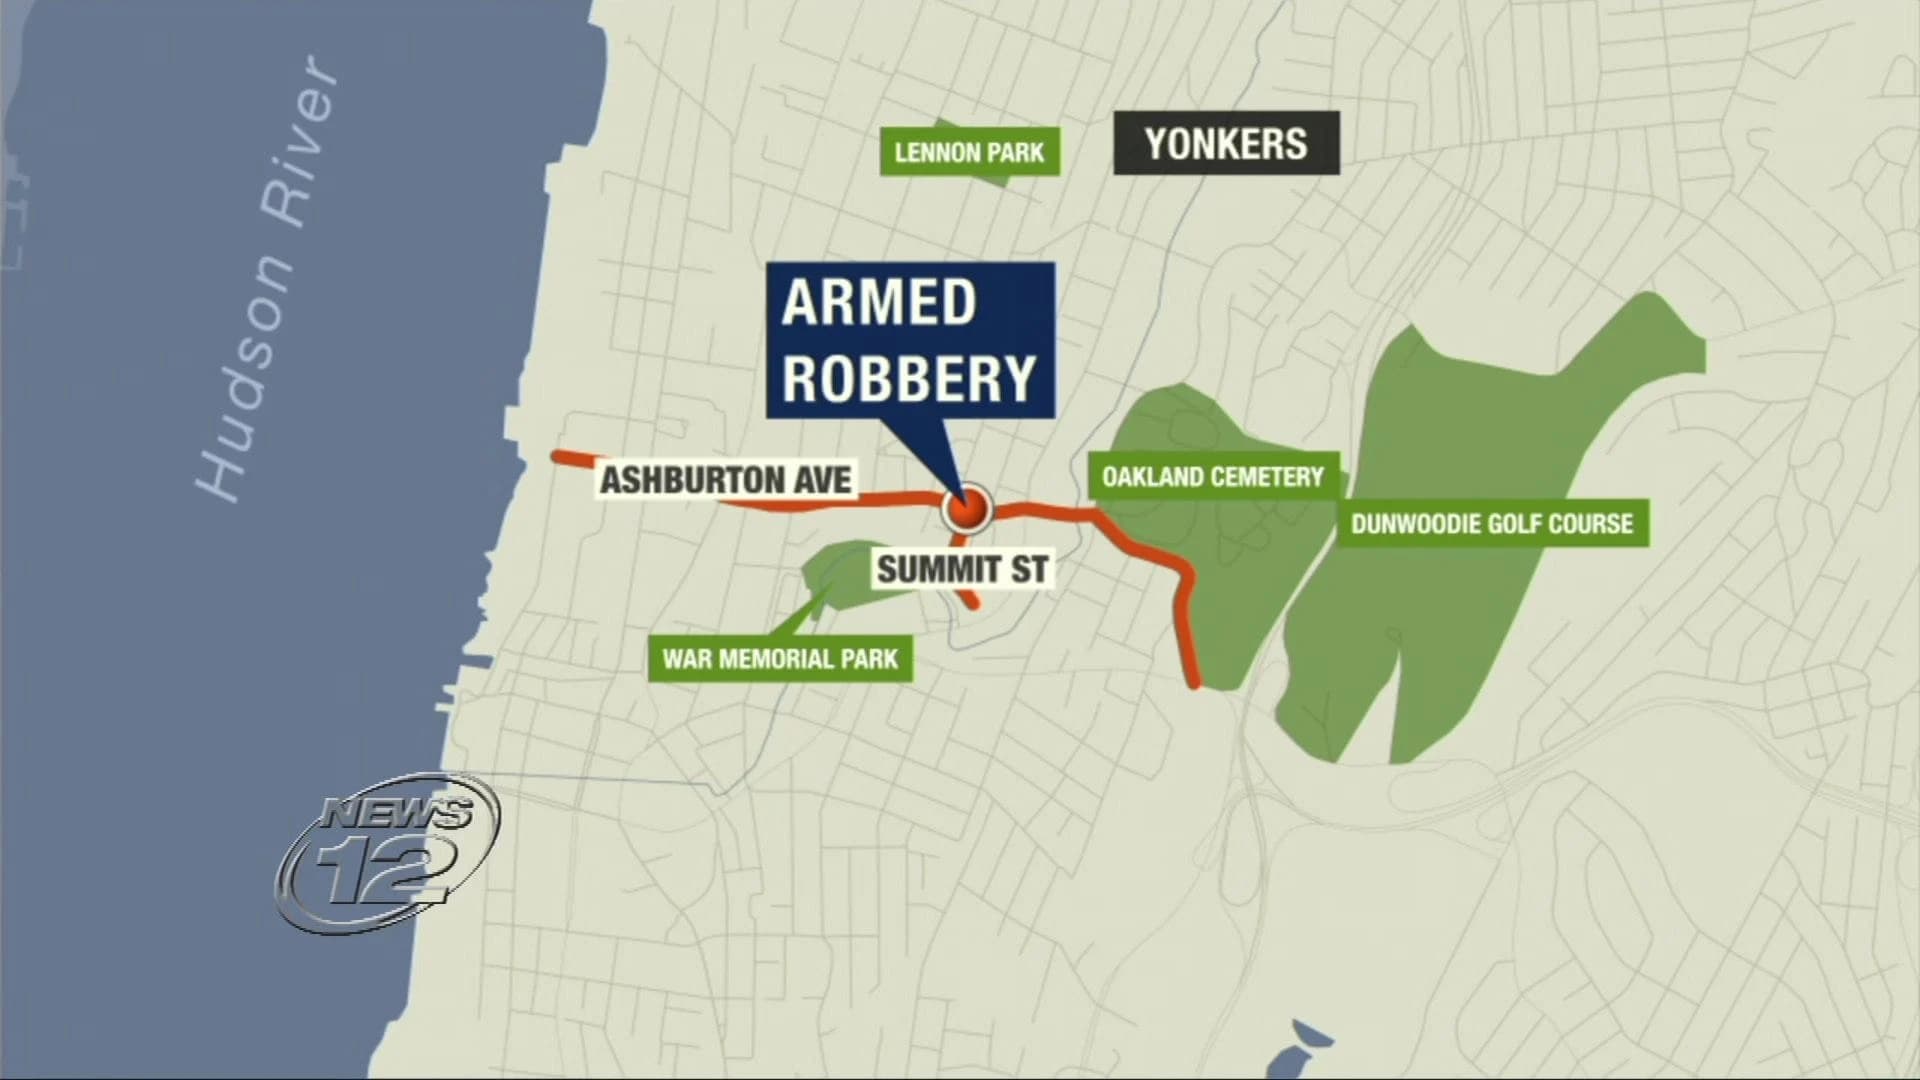 Man robbed at gunpoint in Yonkers